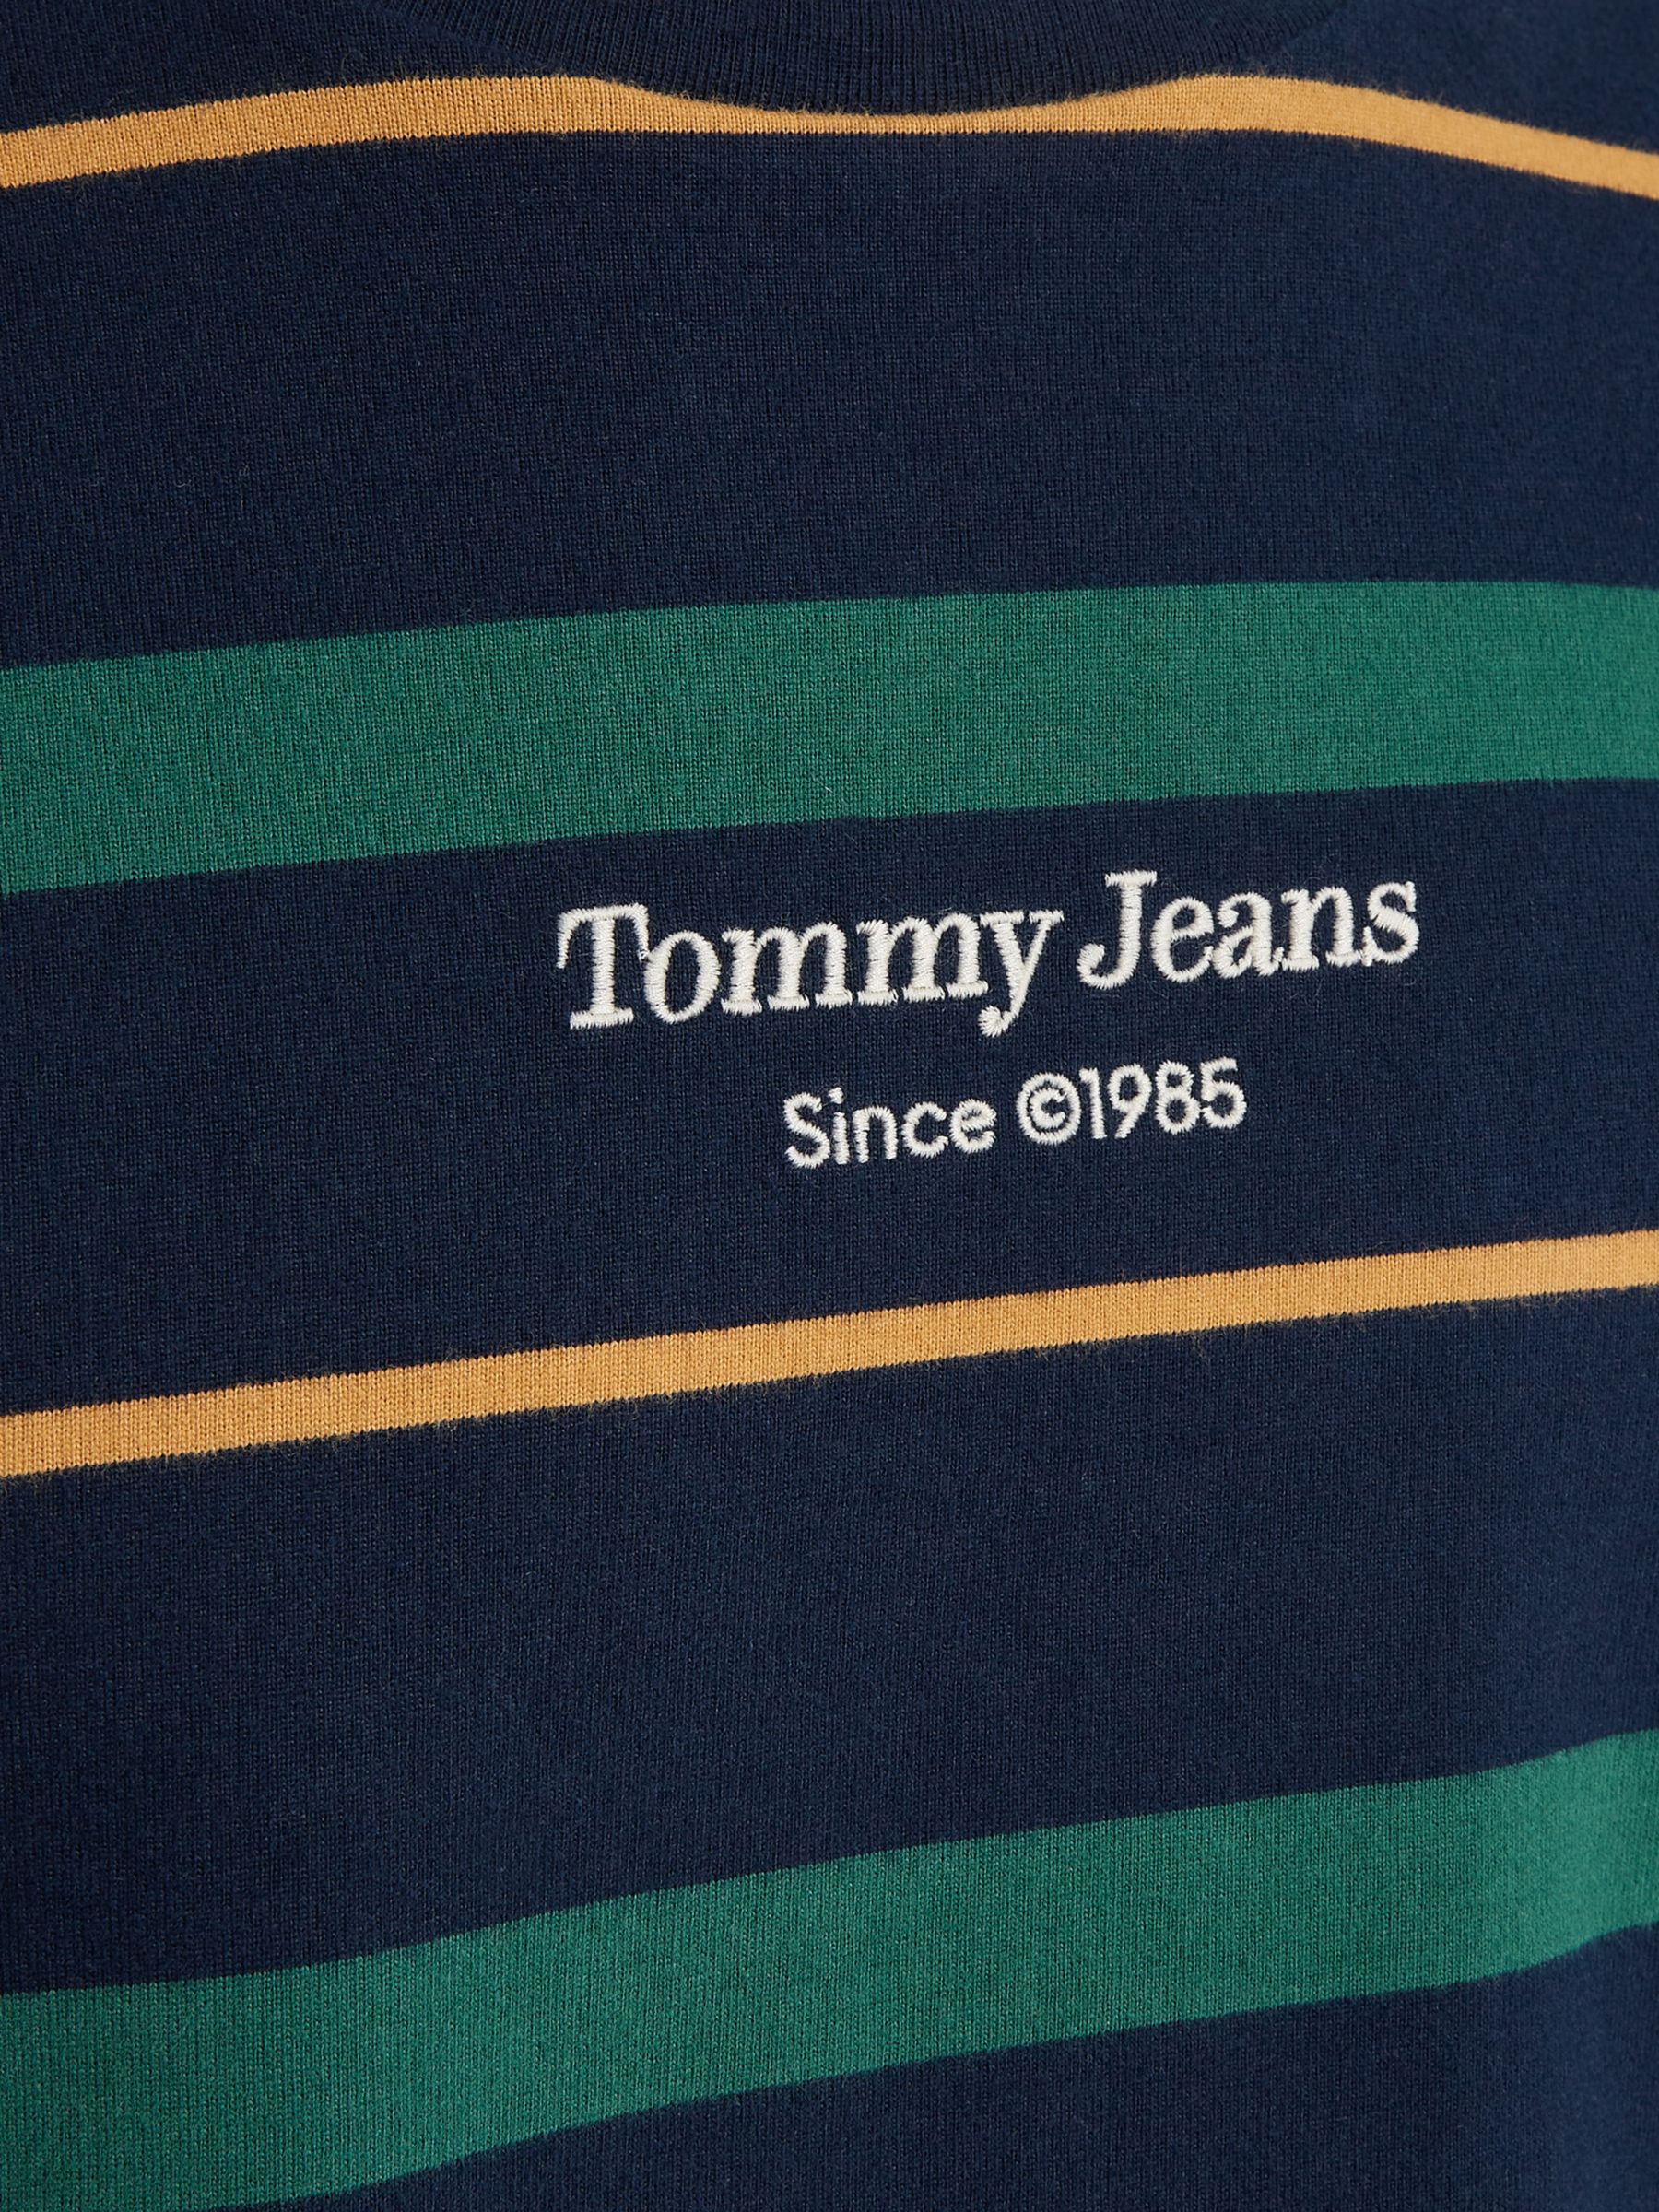 Buy Tommy Jeans Stripe Long Sleeve T-Shirt, Navy/Multi Online at johnlewis.com